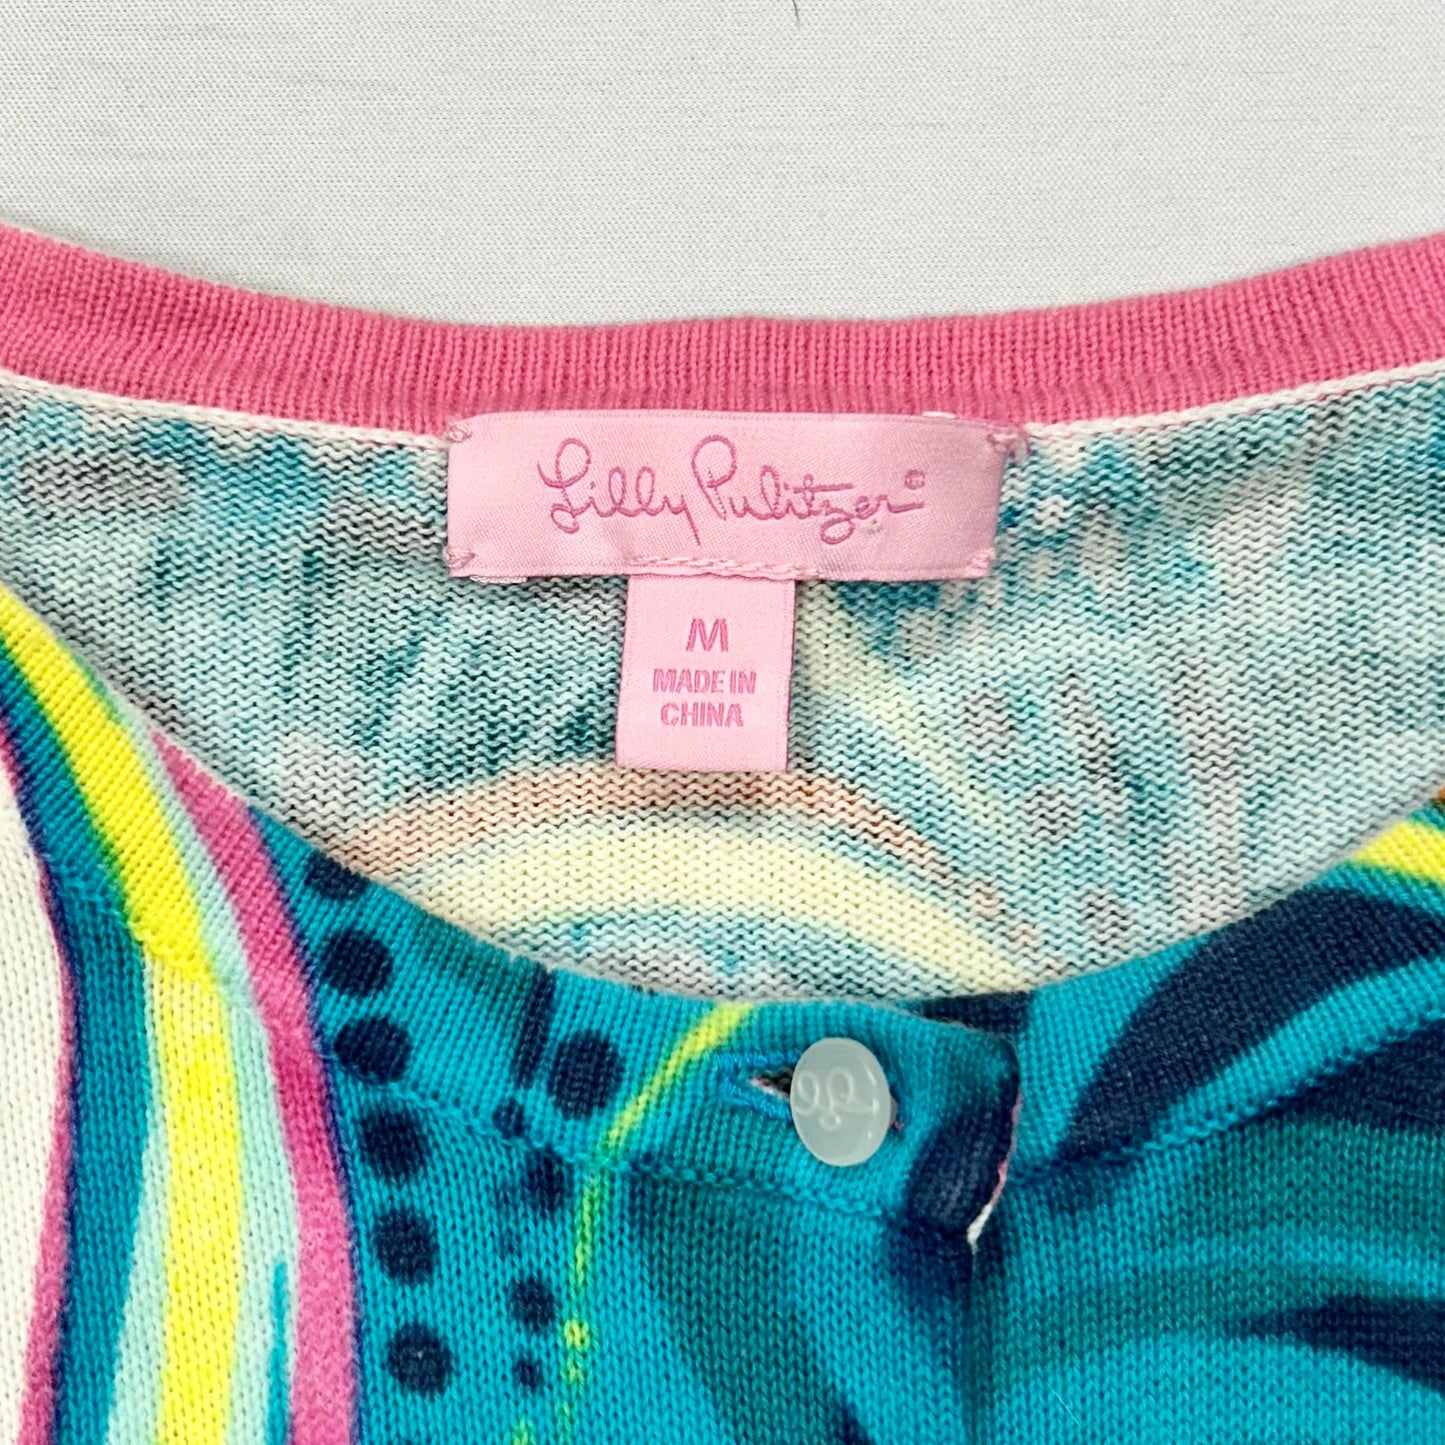 Blue & Pink Sweater Cardigan Designer By Lilly Pulitzer, Size: M